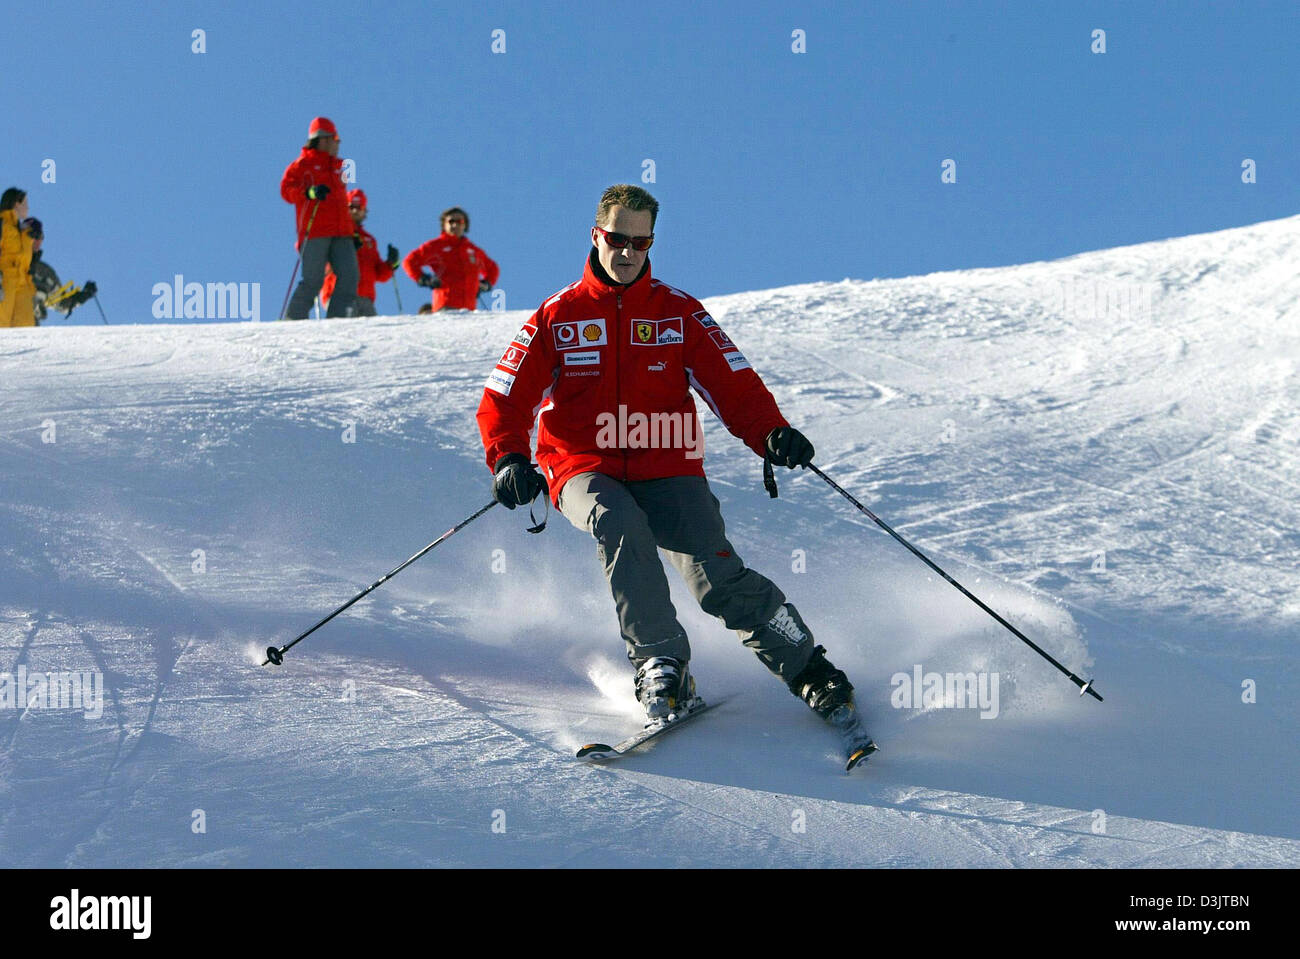 (dpa) - Seven time Formula 1 champion Michael Schumacher (team Ferrari) skis down the slopes shortly after arriving in the ski resort of Madonna di Campiglio, Italy, 11 January 2005. The Ferrari team got together for its traditional ski vacation in the Italian Alps. (ITALY OUT) Stock Photo